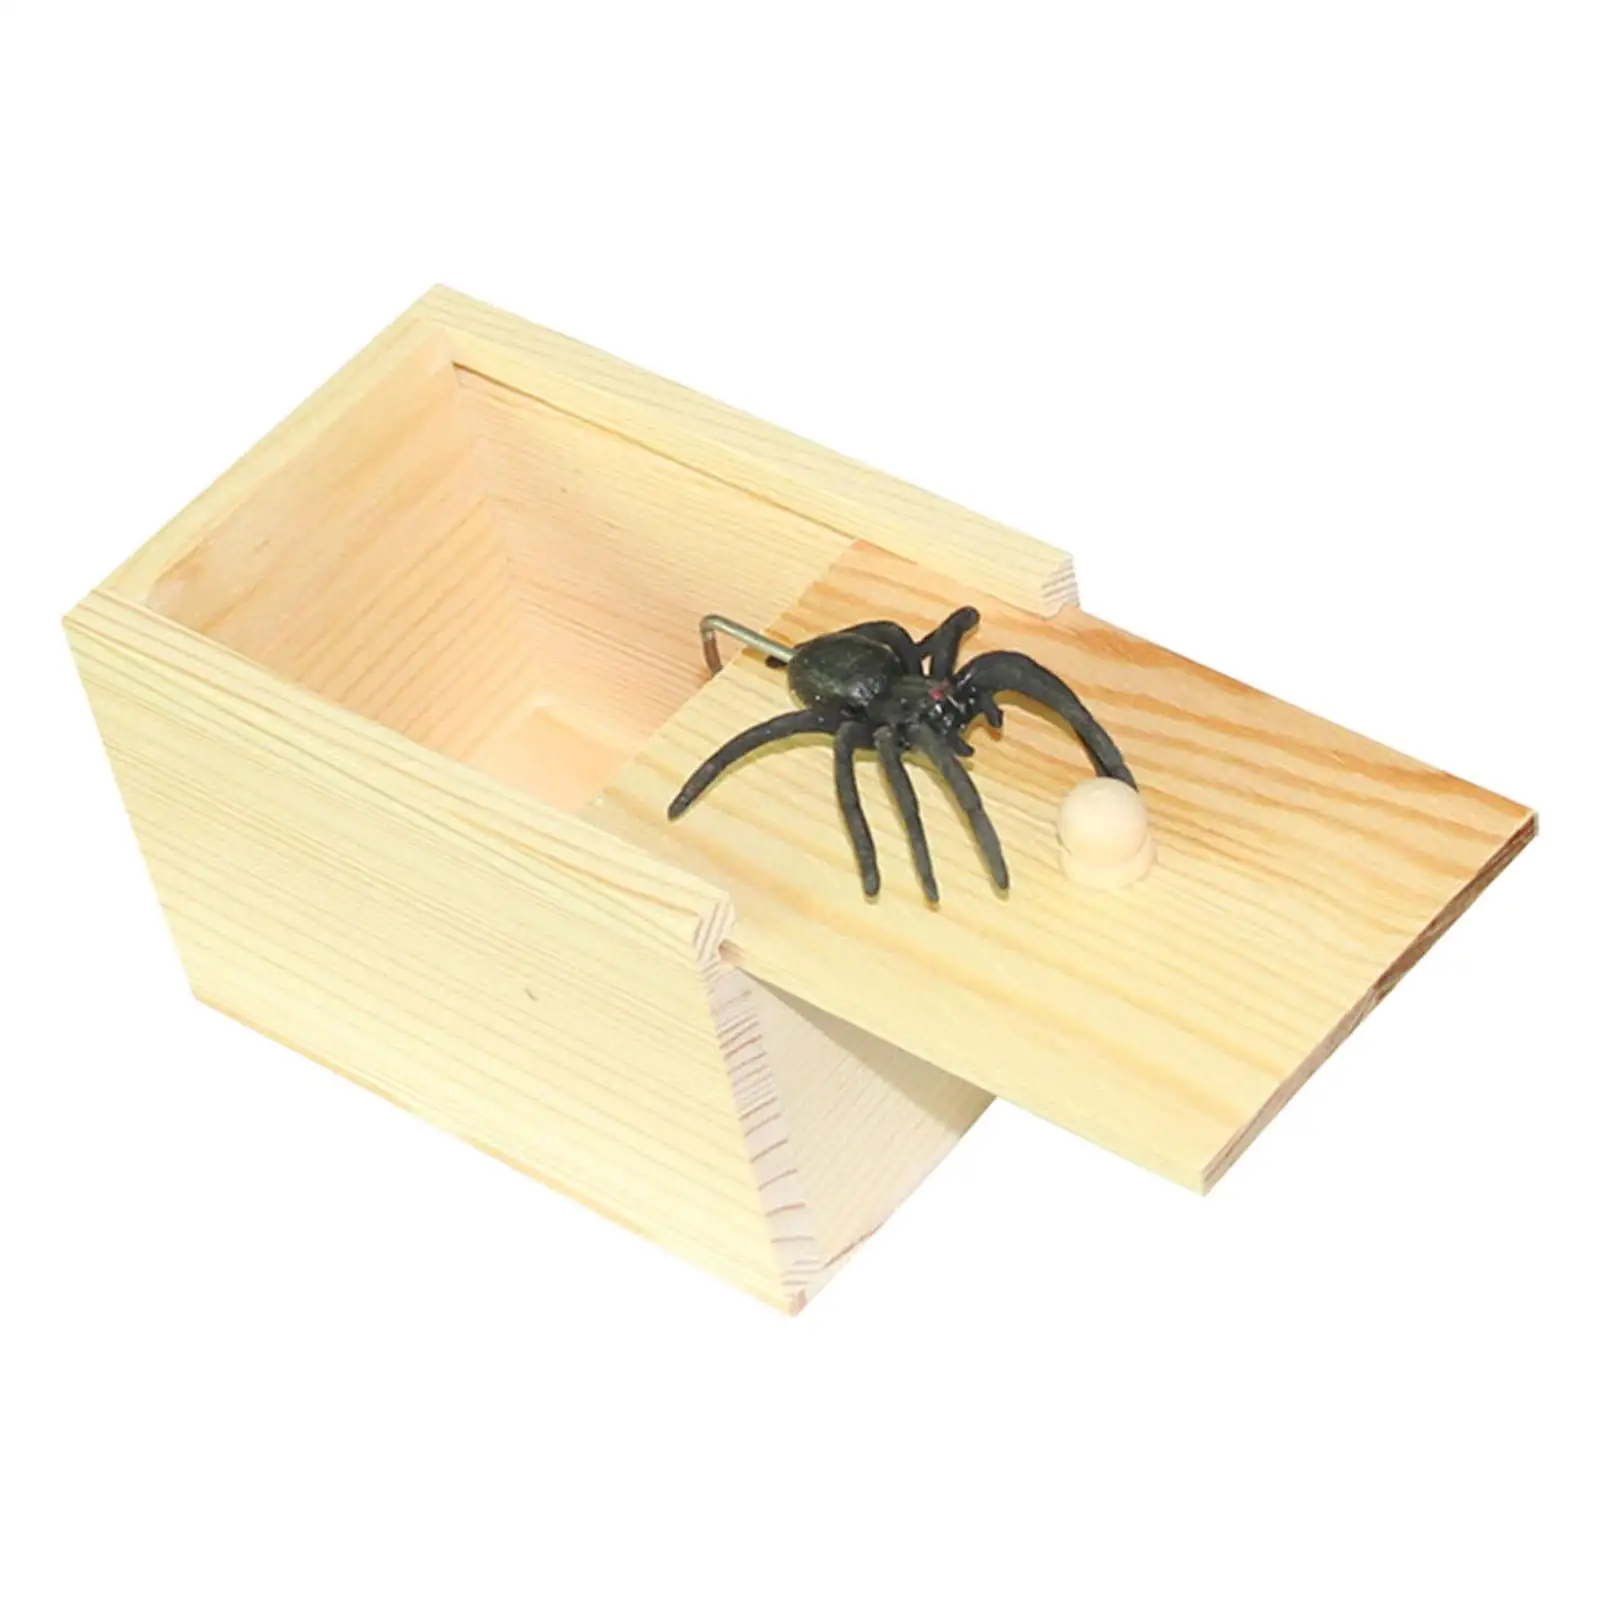 Wooden Prank Spider Scare Box Practical Joke Fun Scare Prank Gag Gifts Handcrafted Wooden Box Prank for Carnivals Kids